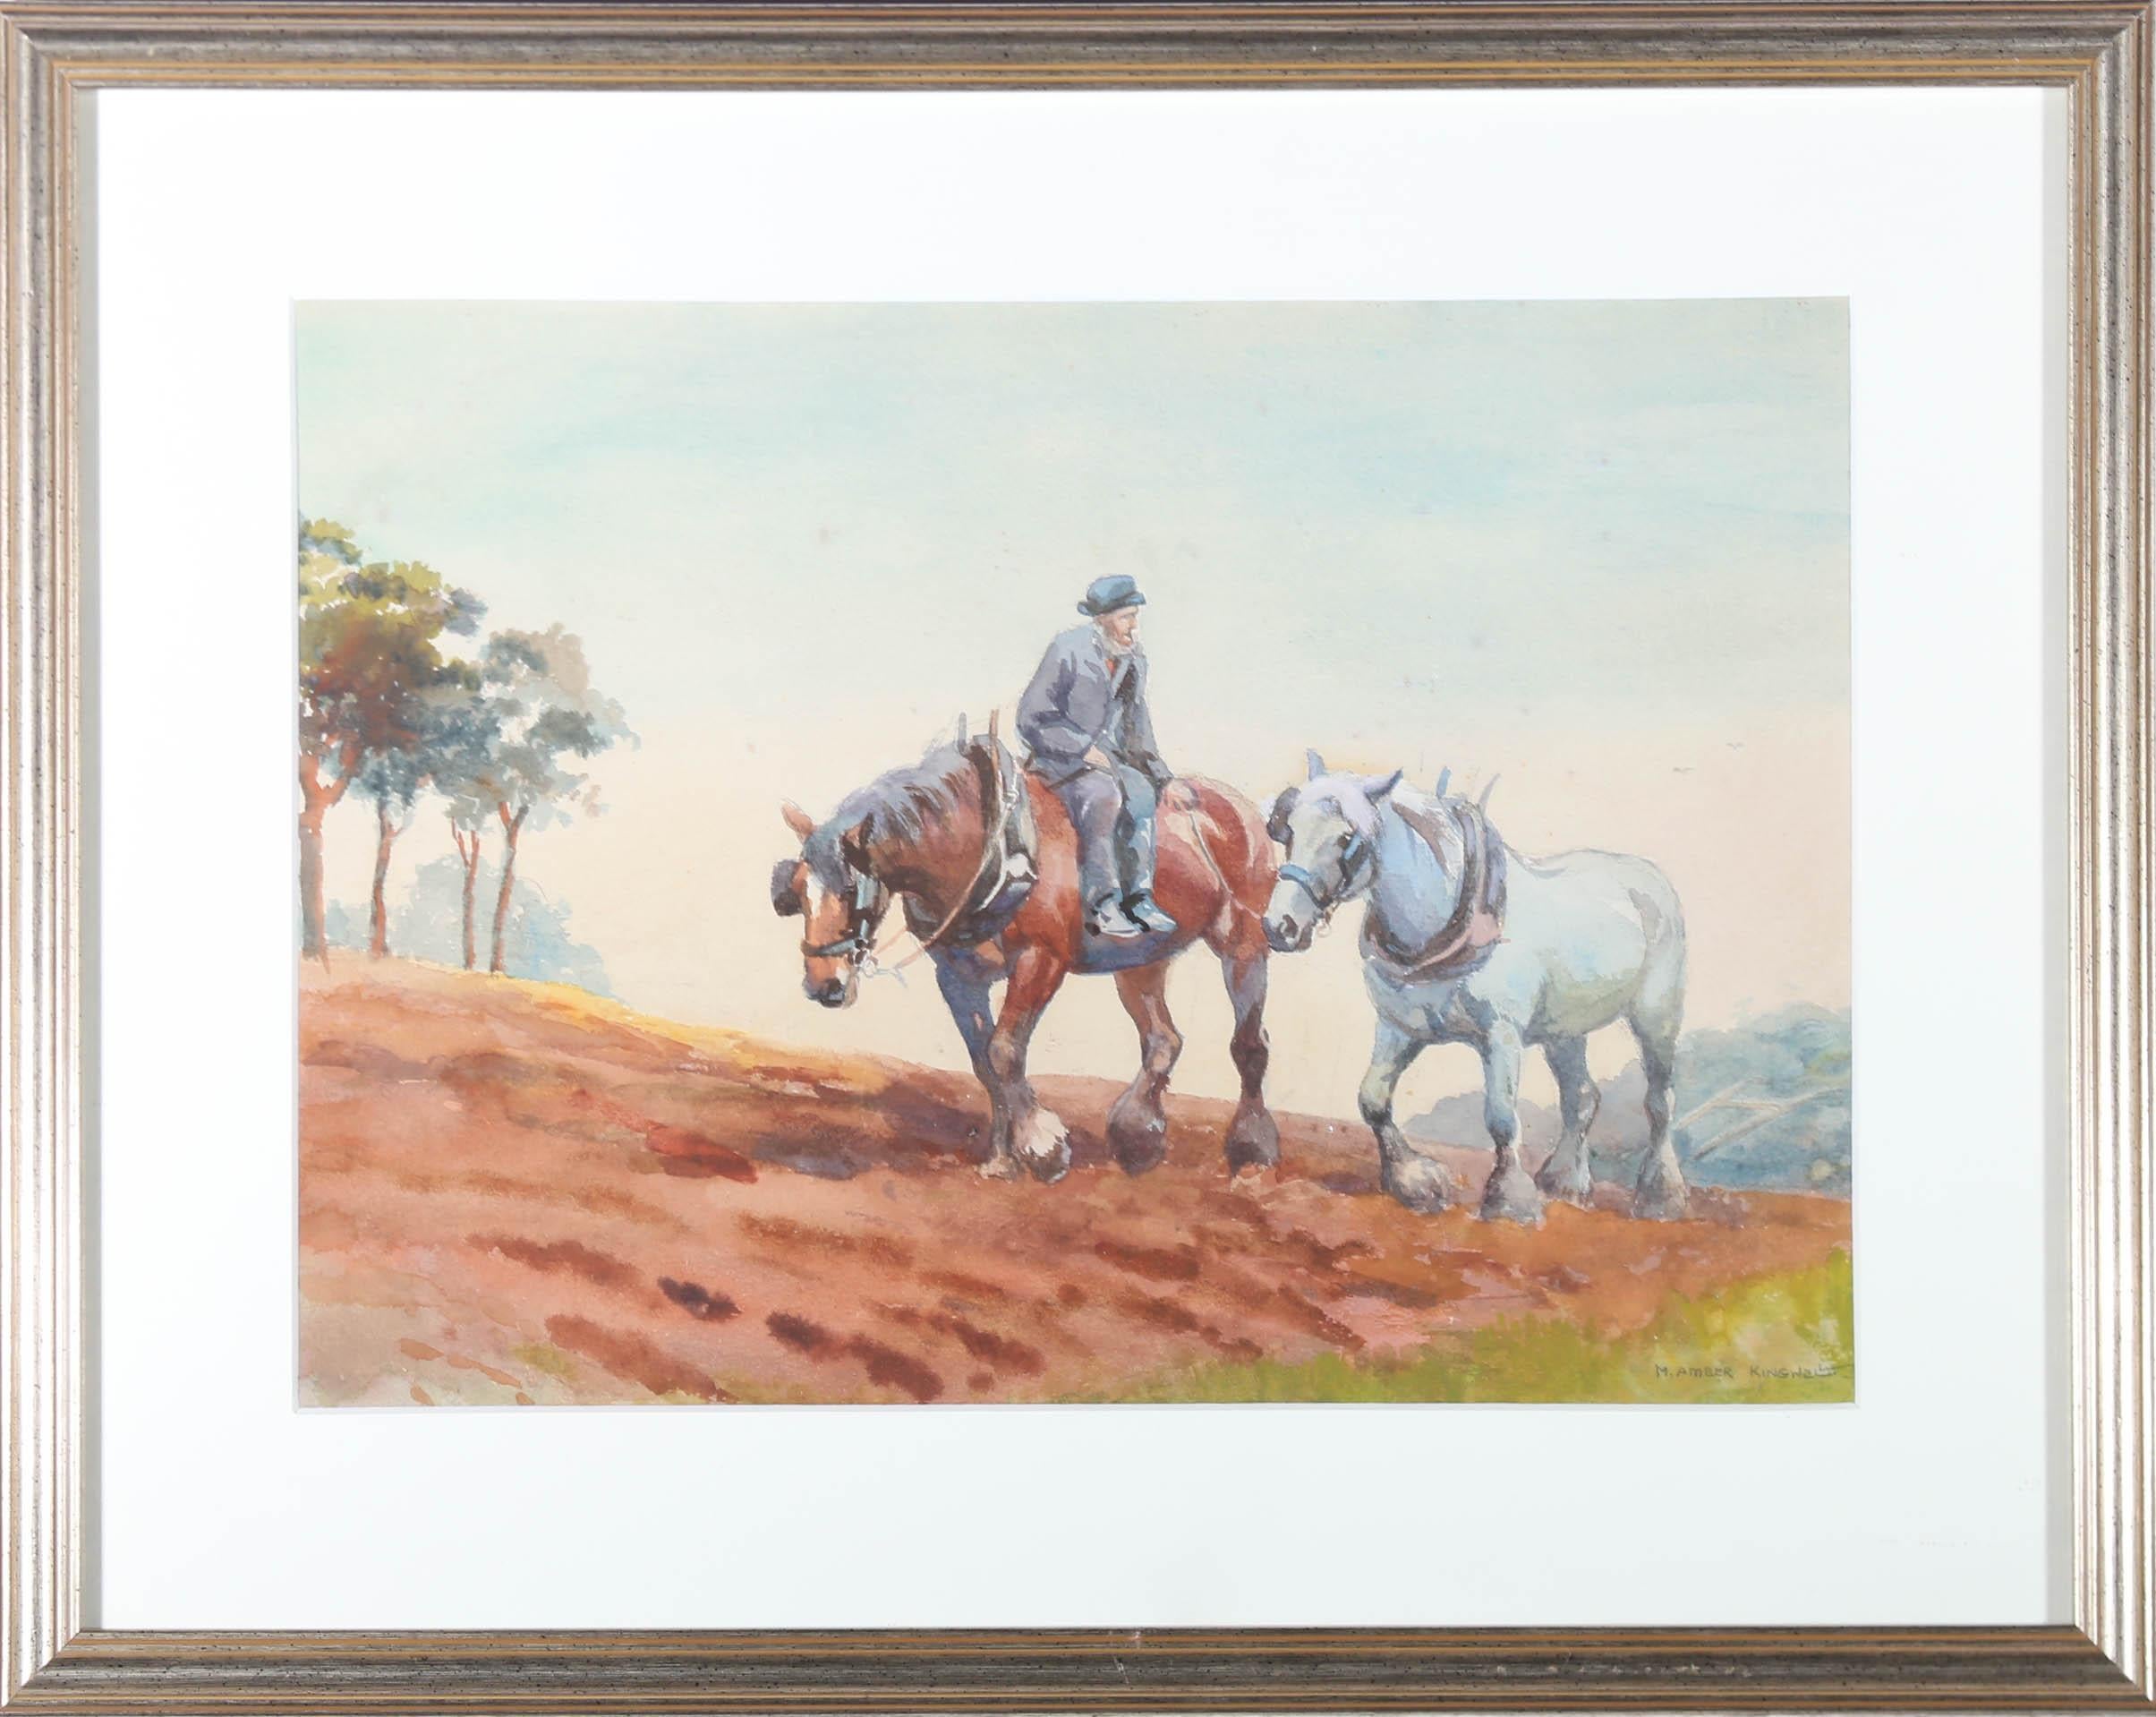 A charming agricultural scene from the early 20th century, showing a farmer paused for a break in the fields with his two hard working horses. Signed by the artist to the lower right. Well presented in a new card mount and contemporary gilt frame.